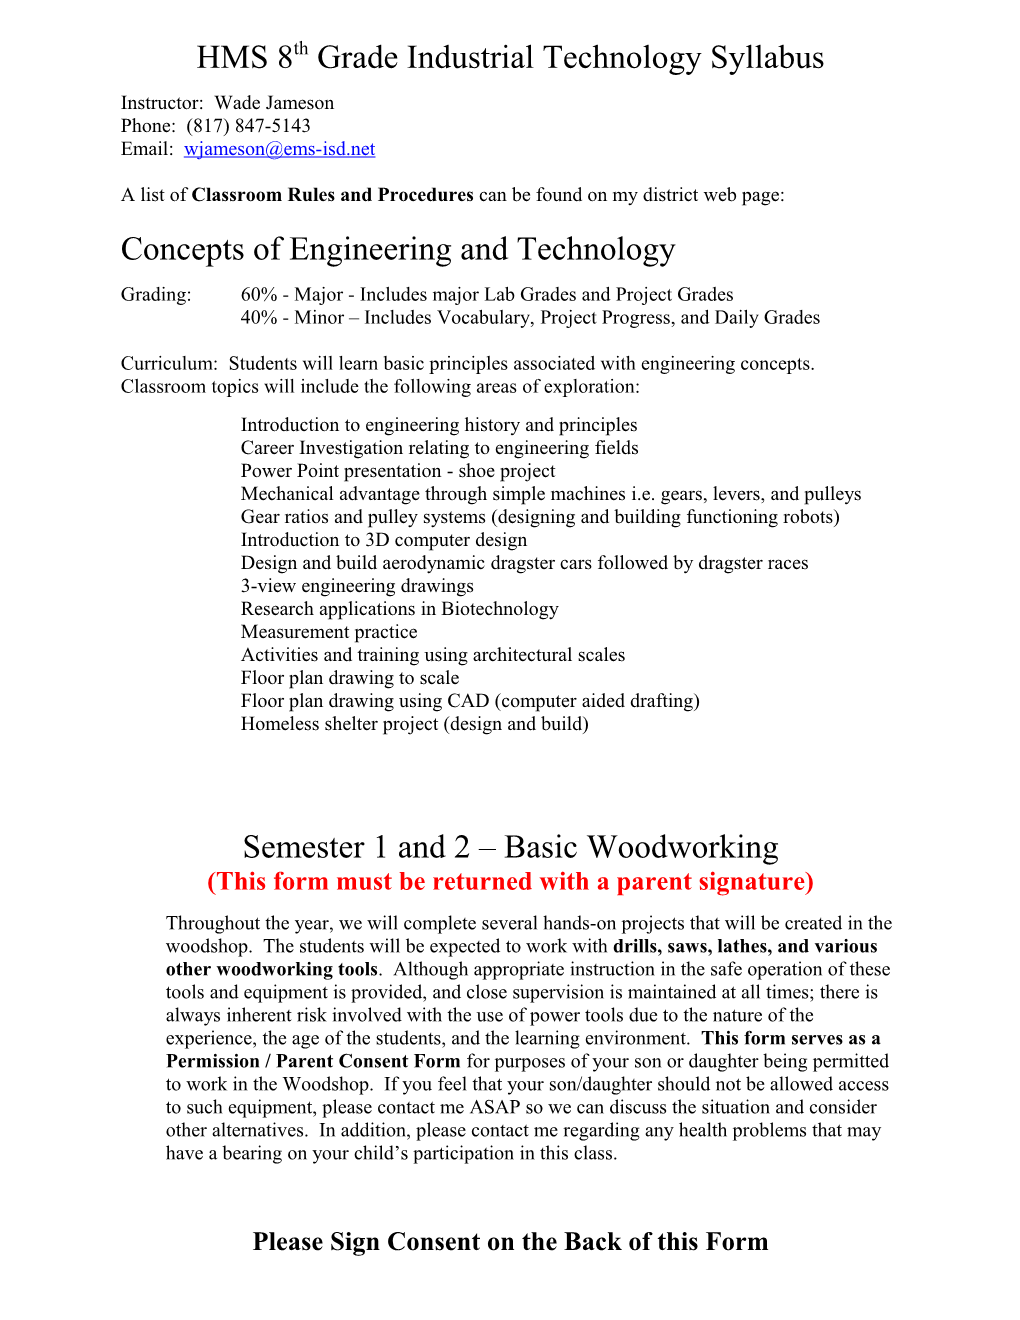 PVMS Exploratory Technology Guidelines